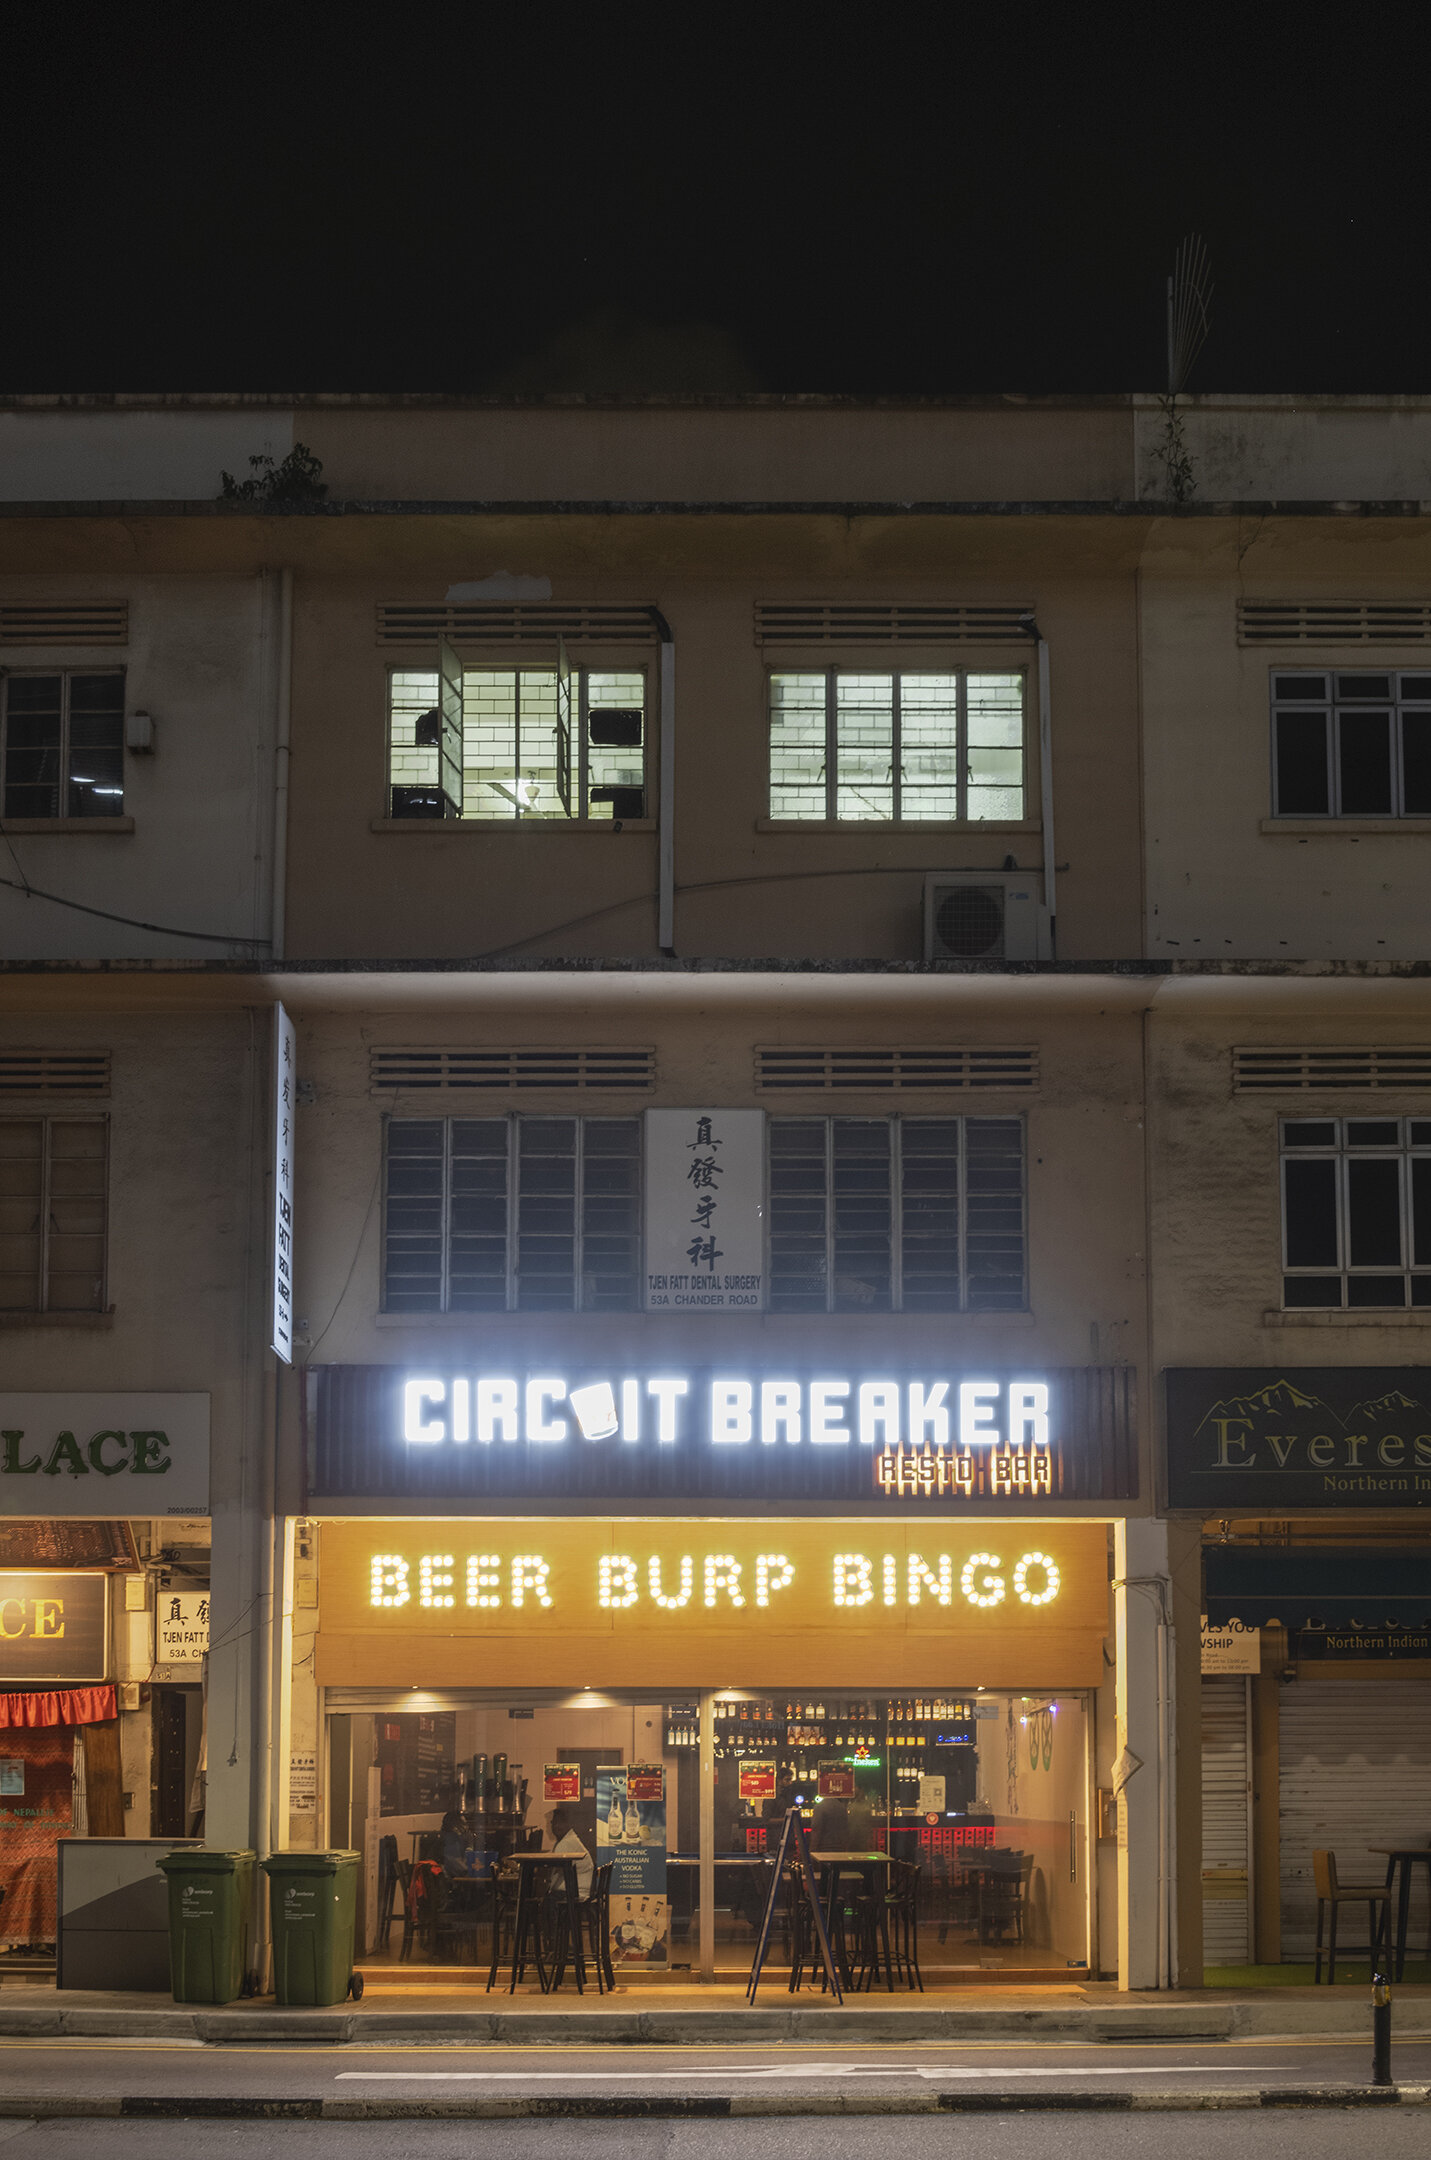  Someone found some humor amidst the past year:  “Circuit Breaker” was the name given to our Covid quarantine efforts in Singapore 